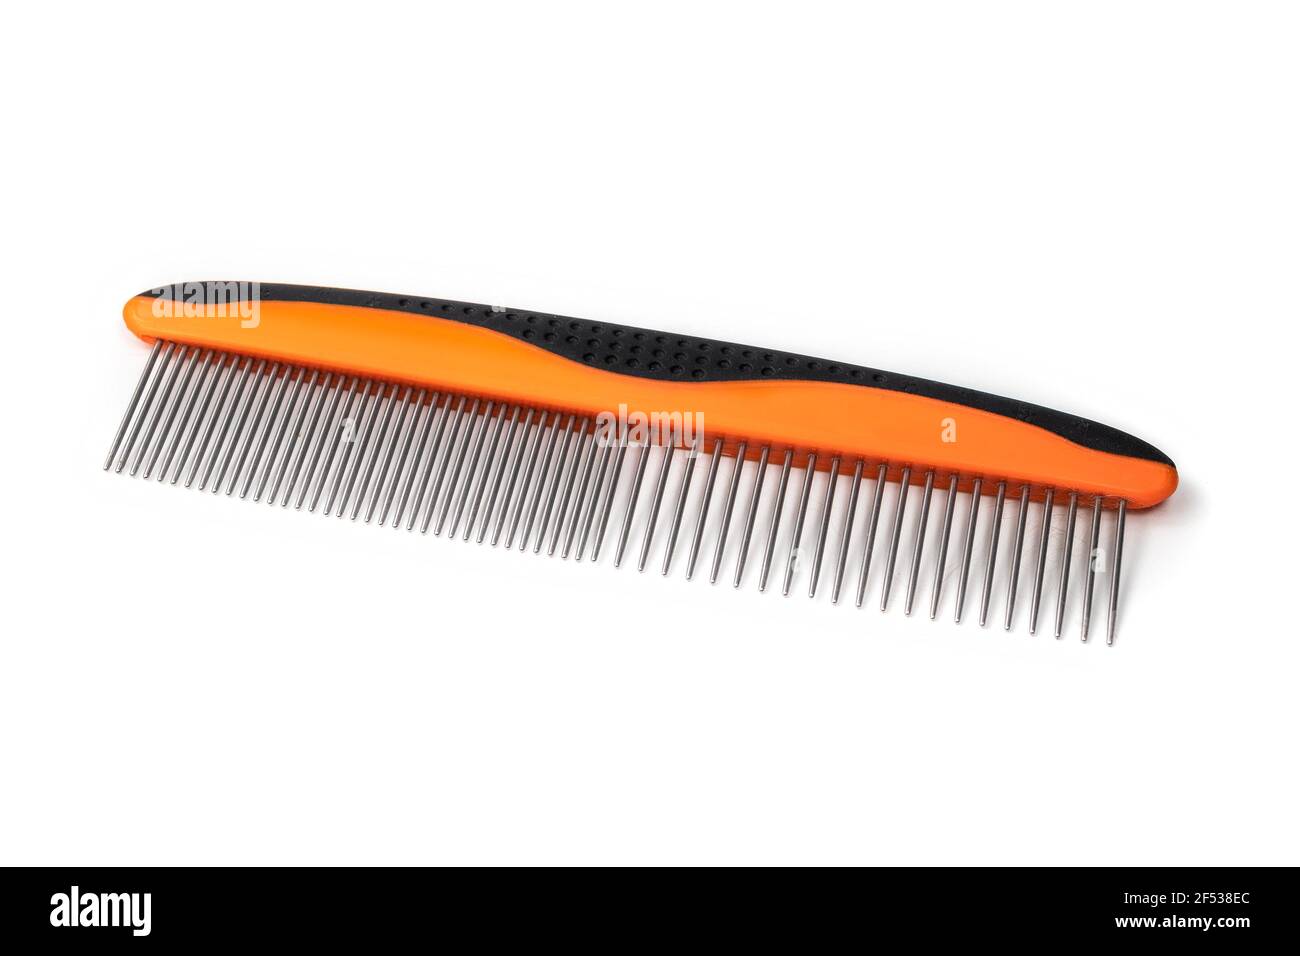 Pet comb for dematting, detangle or remove knots in animal hair. Used by groomers and pet owners to brush or maintain cat and dog fur. Isolated on whi Stock Photo